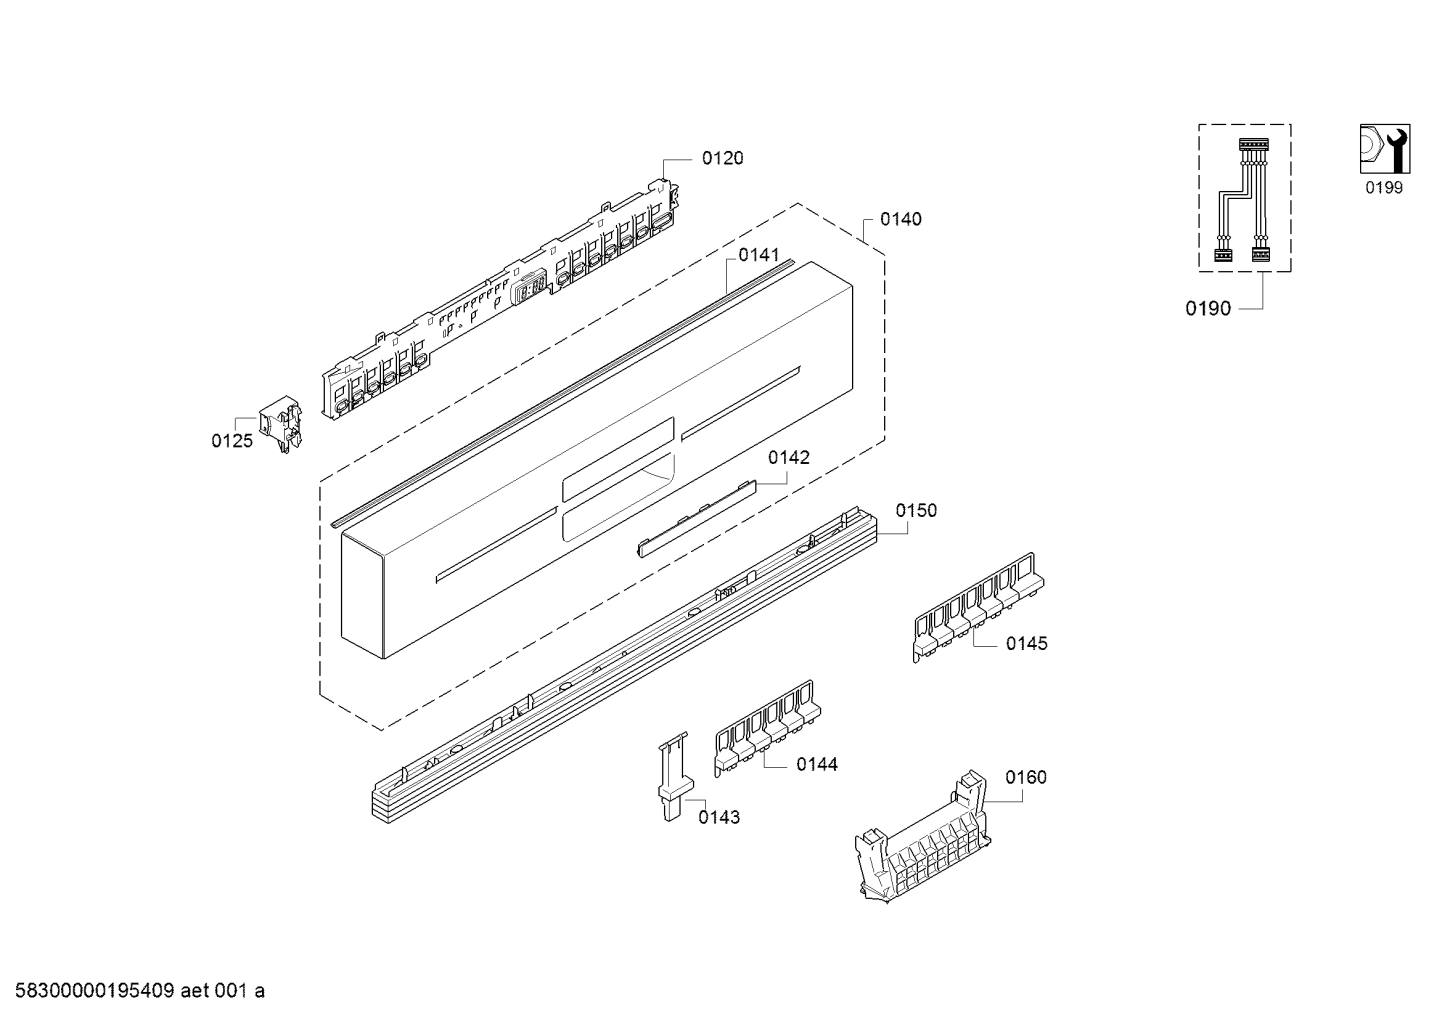 drawing_link_4_device_1719947